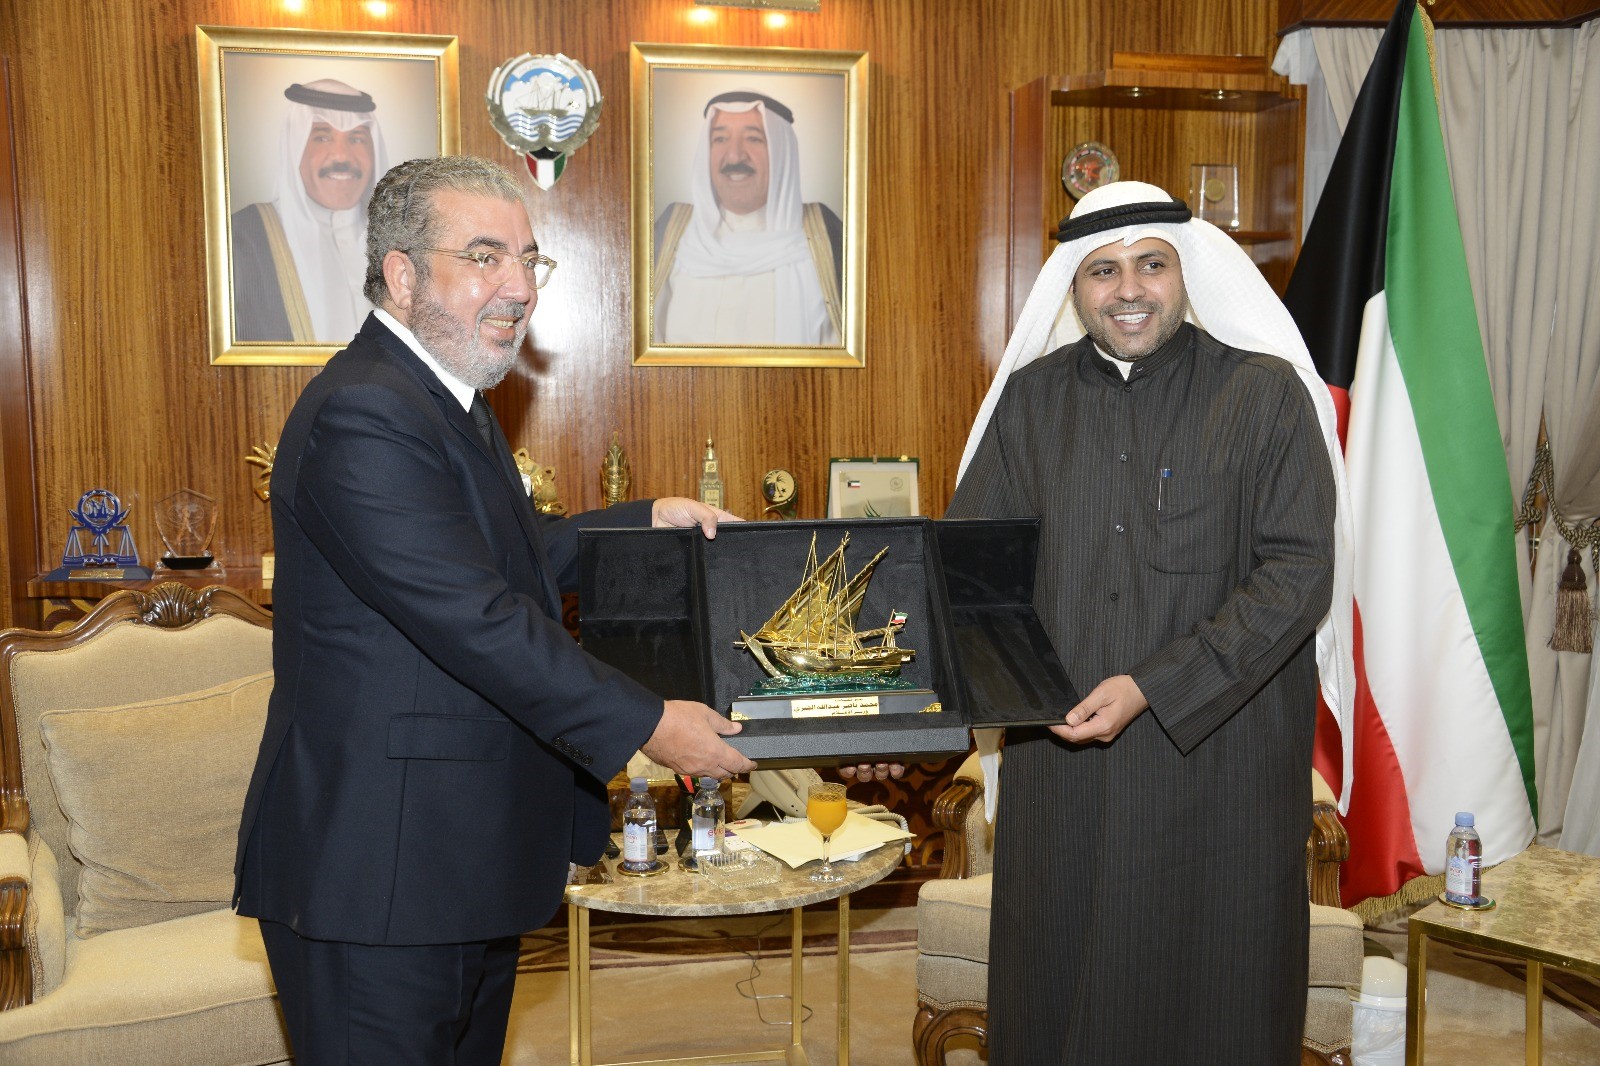 Kuwaiti Minister of Information Mohammed Al-Jabri presented Director General of the Arab Maghreb News Agency (MAP), Khalil Hachimi Idrissi with a commemorative shield  